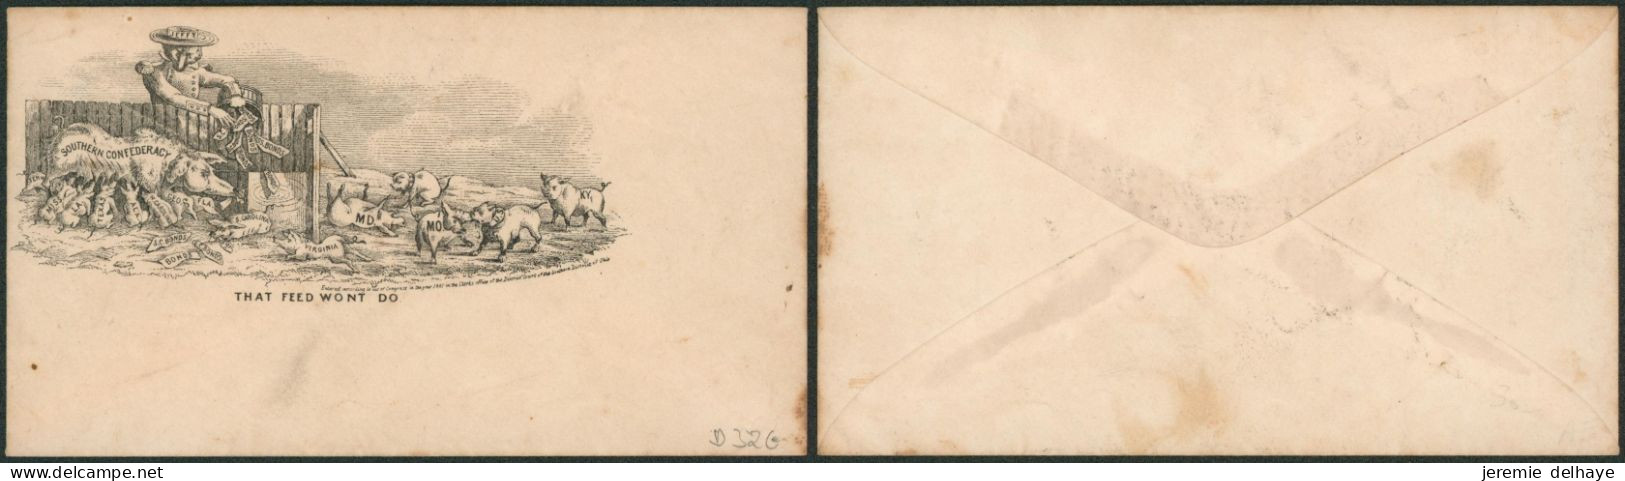 Grande Bretagne - Private Caricature (Southern Confederacy, Pigs, Dogs, USA). Postage Envelope Unused. TB - 1840 Enveloppes Mulready